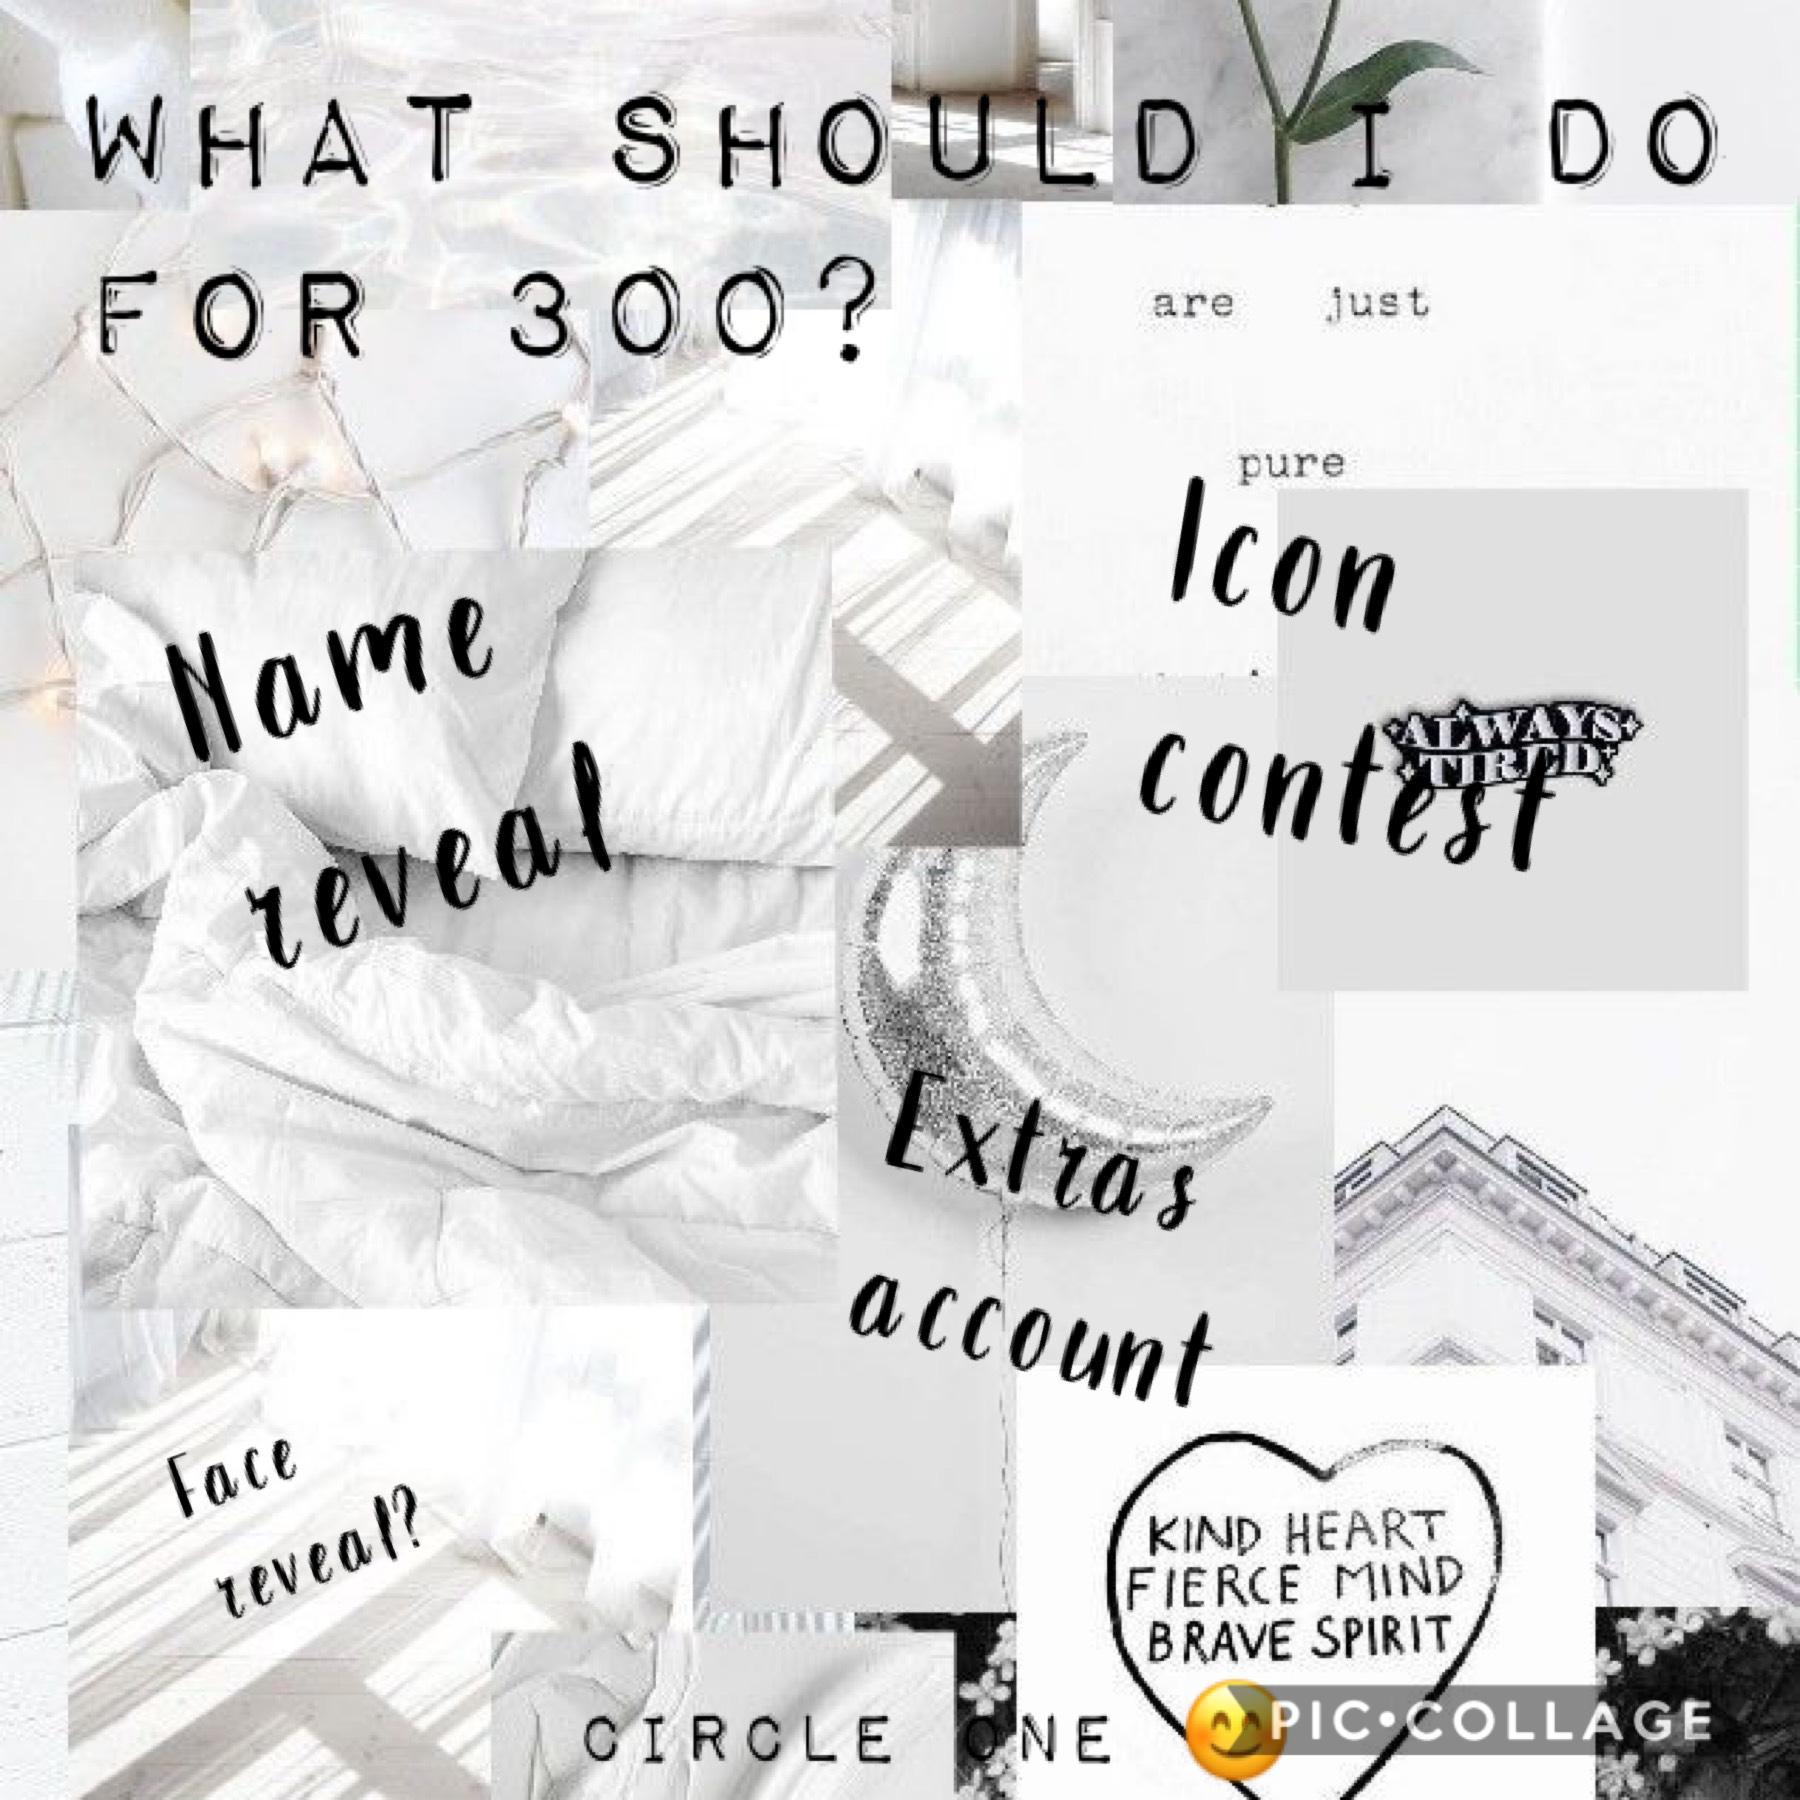 ♾Tap♾

Help me decide what to do for 300! Also comment what you guys should be called!